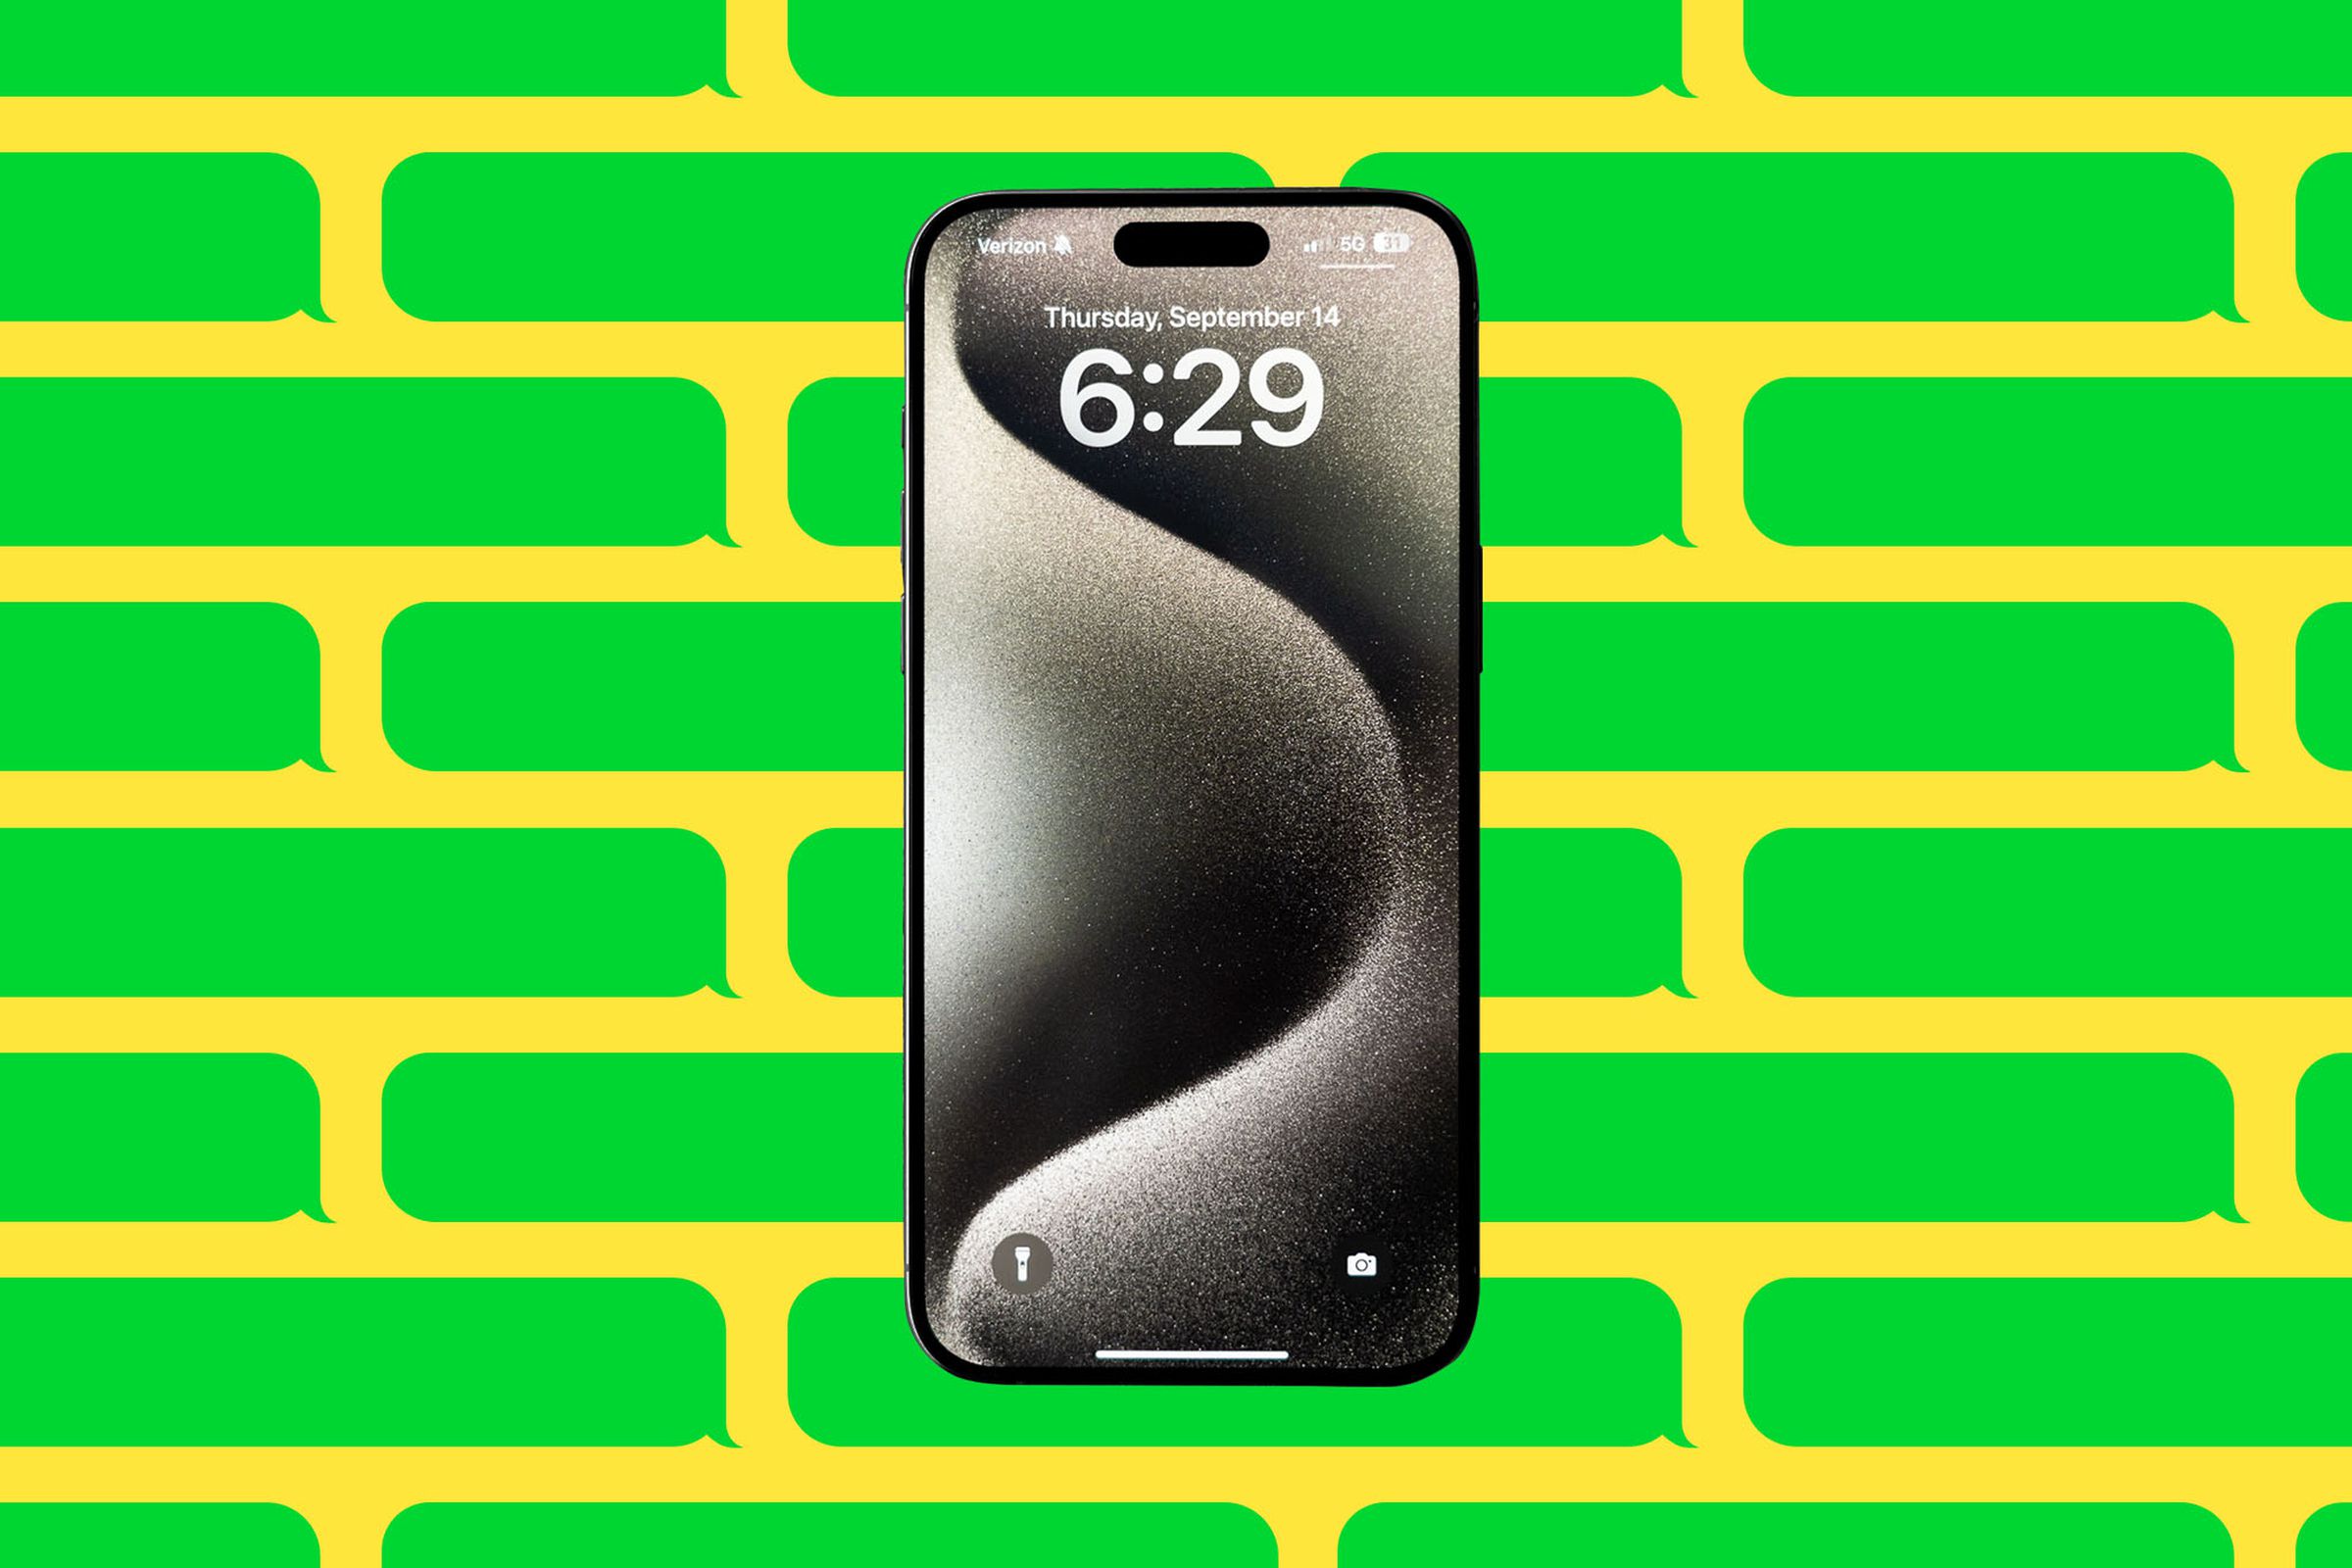 Illustration of an iPhone surrounded by green message bubbles.